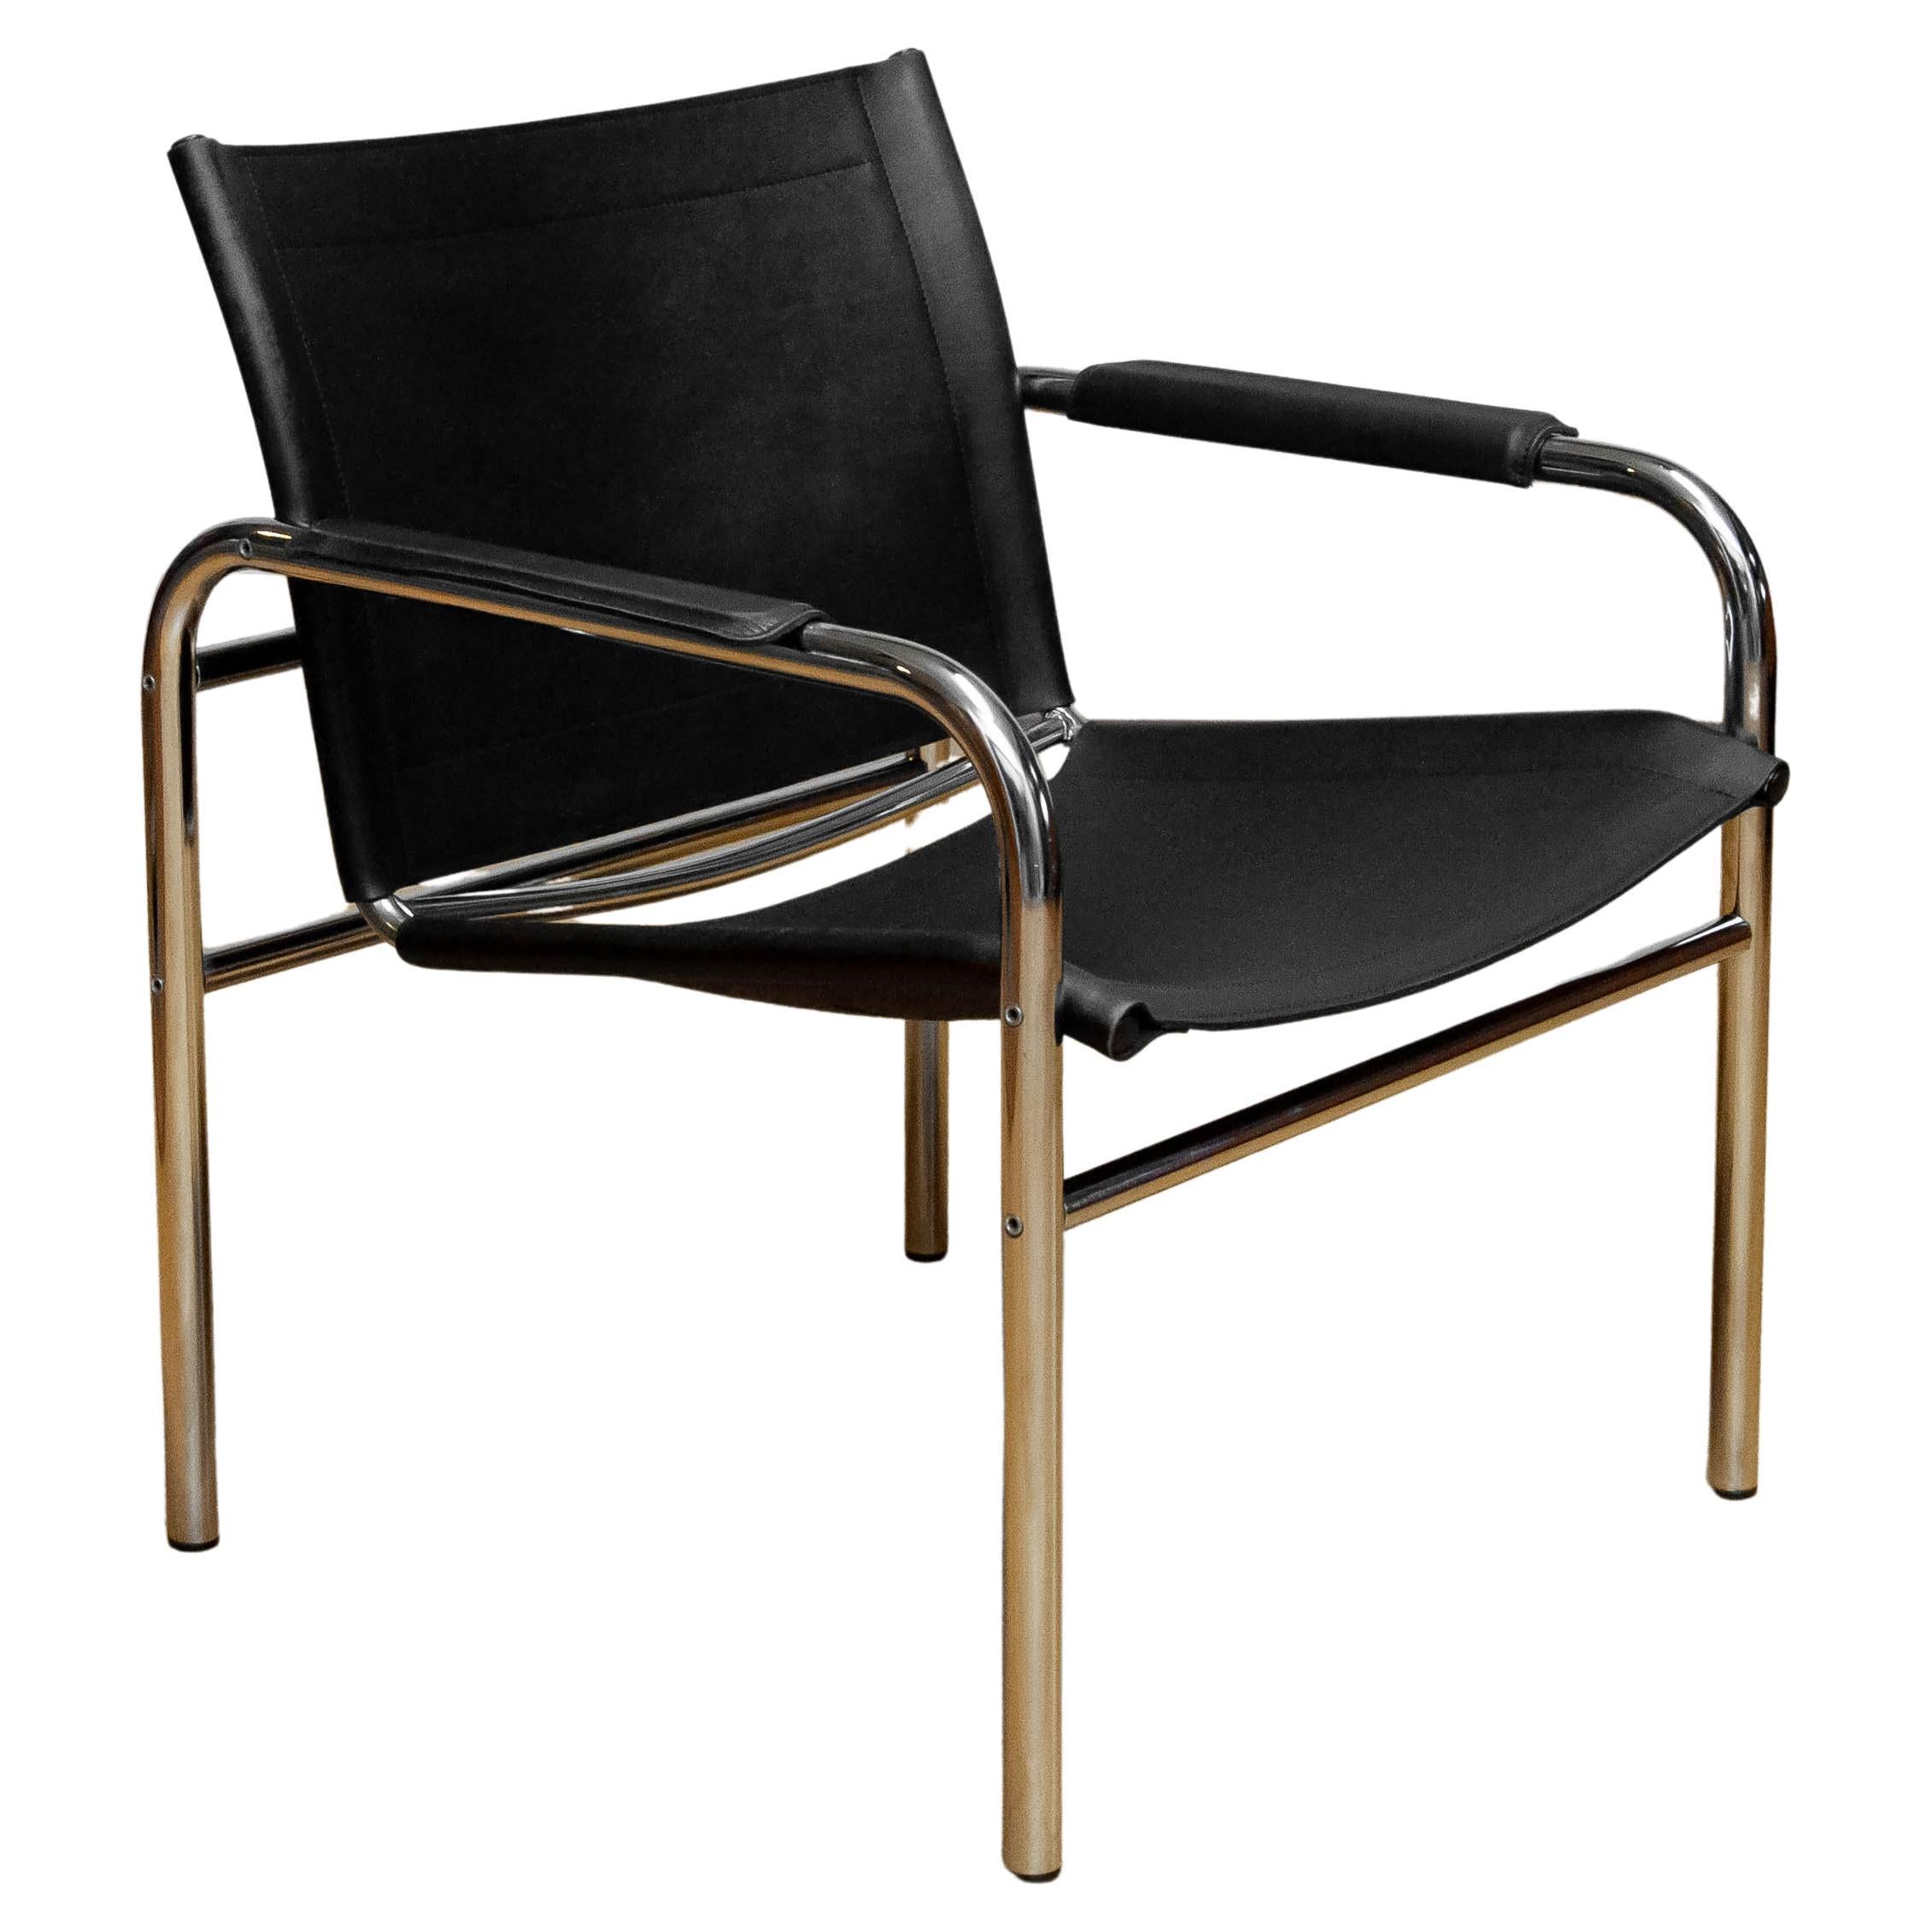 1970s Tubular Armchair Designed By Tord Bjorklund Upholstered With Black Leather